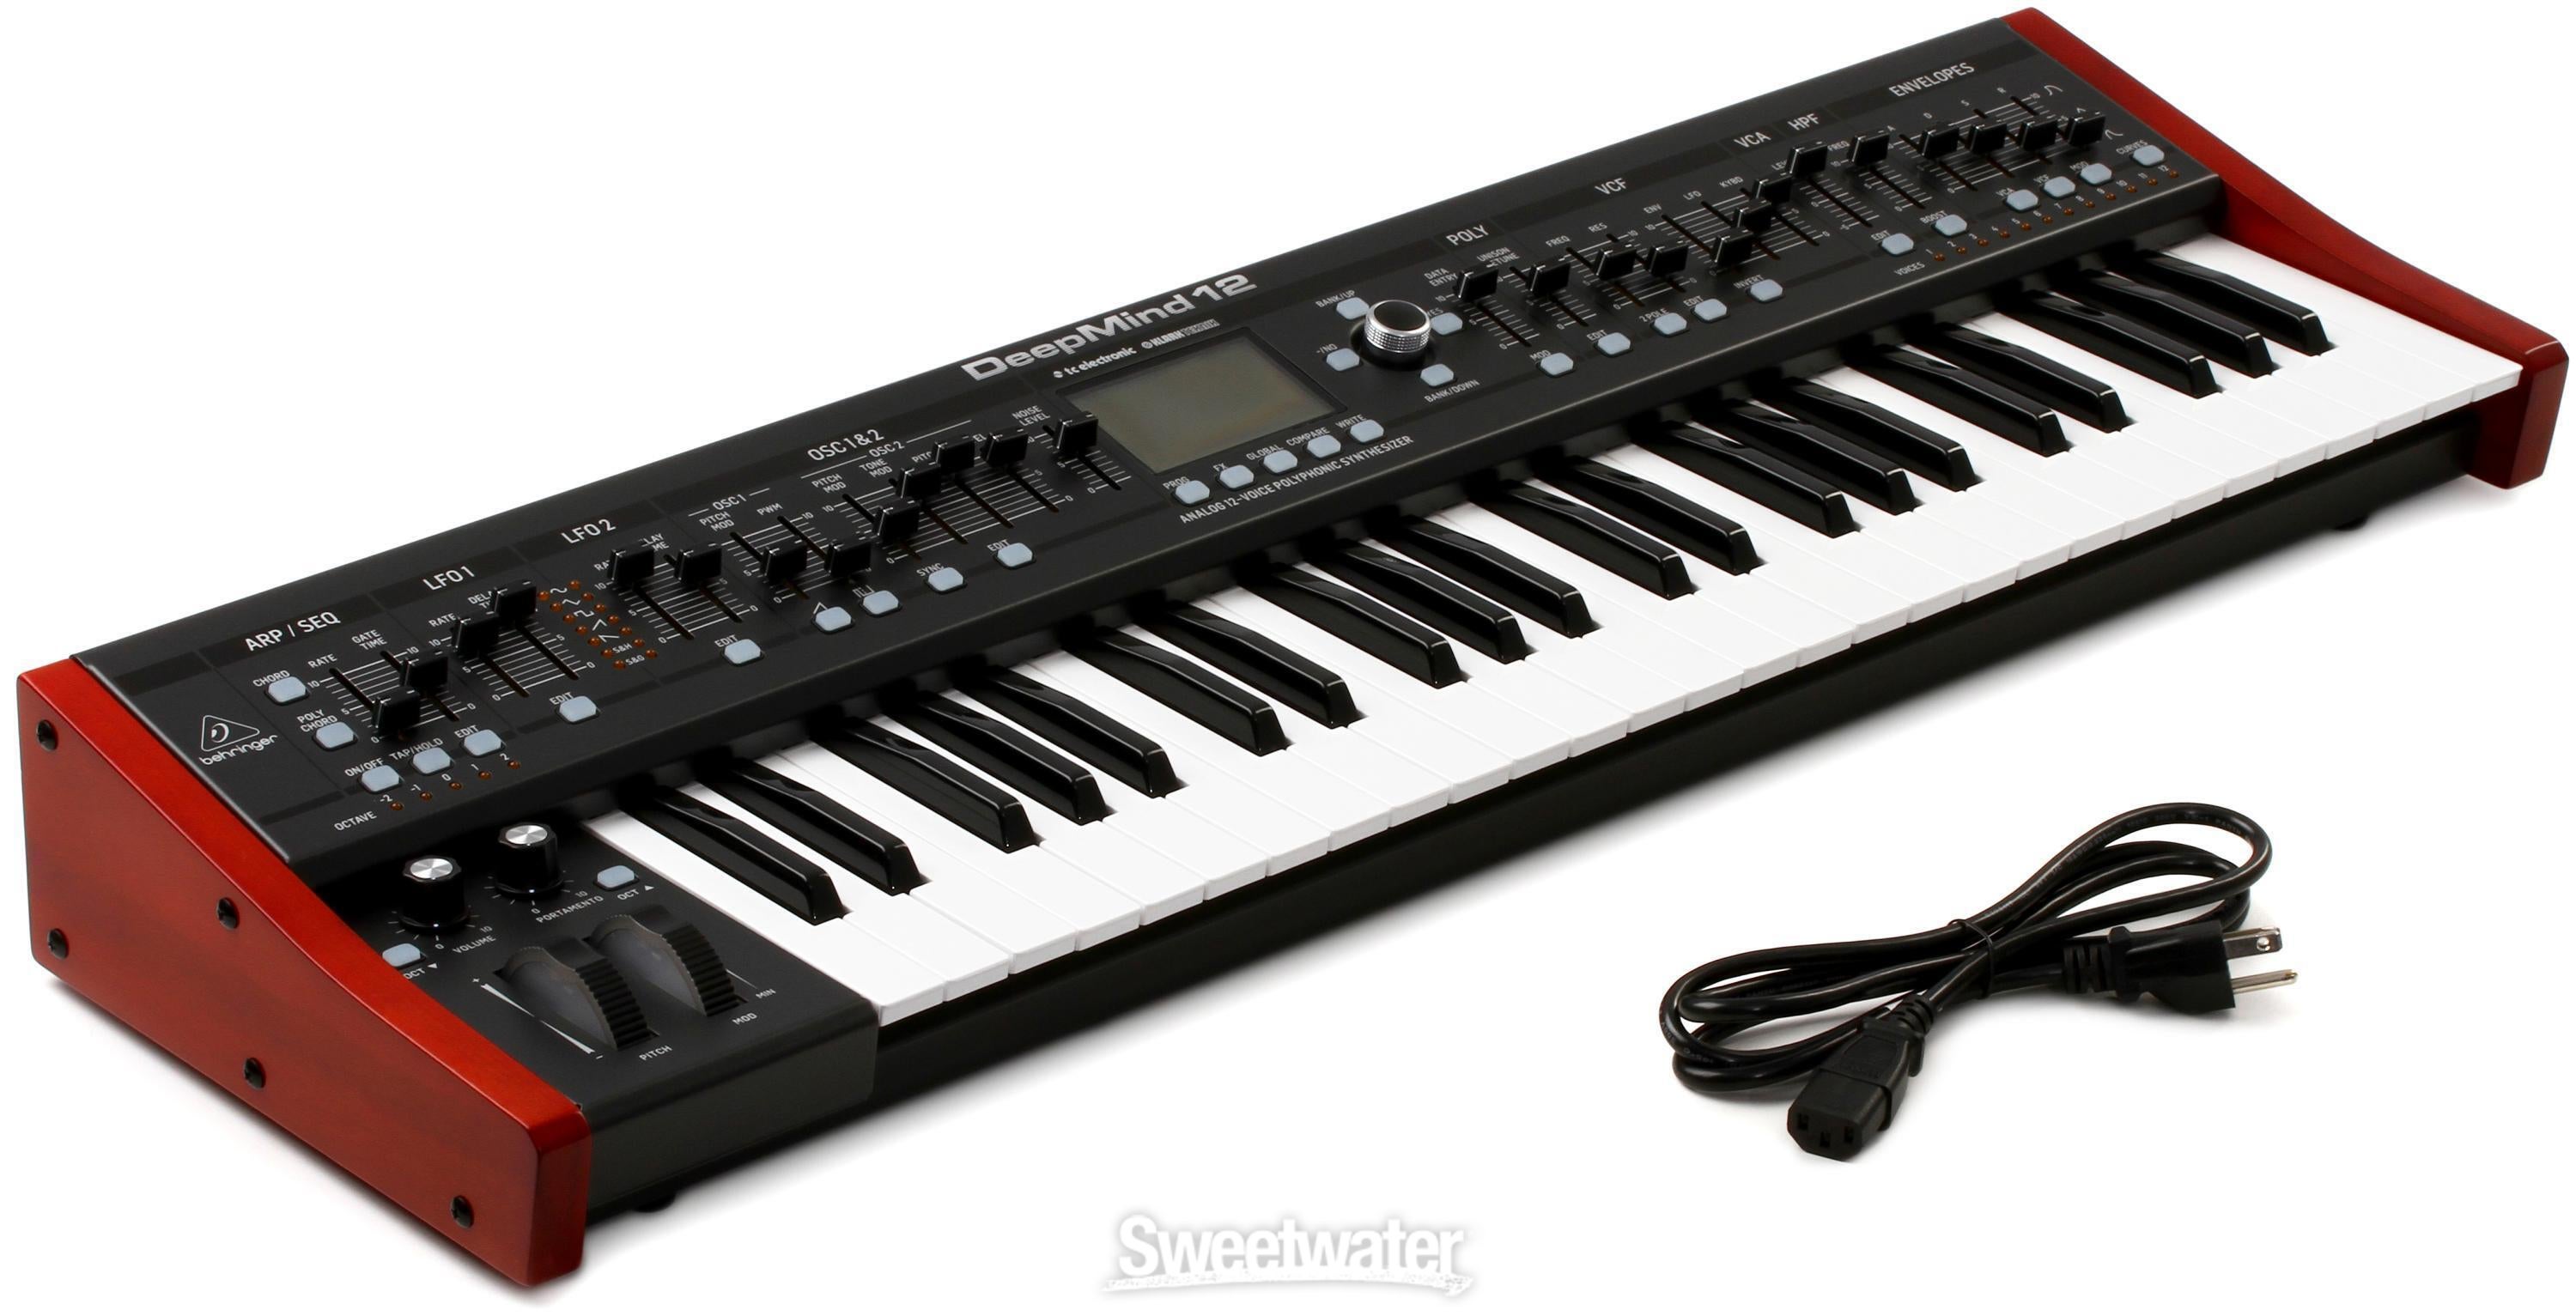 Behringer　49-key　Analog　DeepMind　Synthesizer　Reviews　12　12-voice　Sweetwater